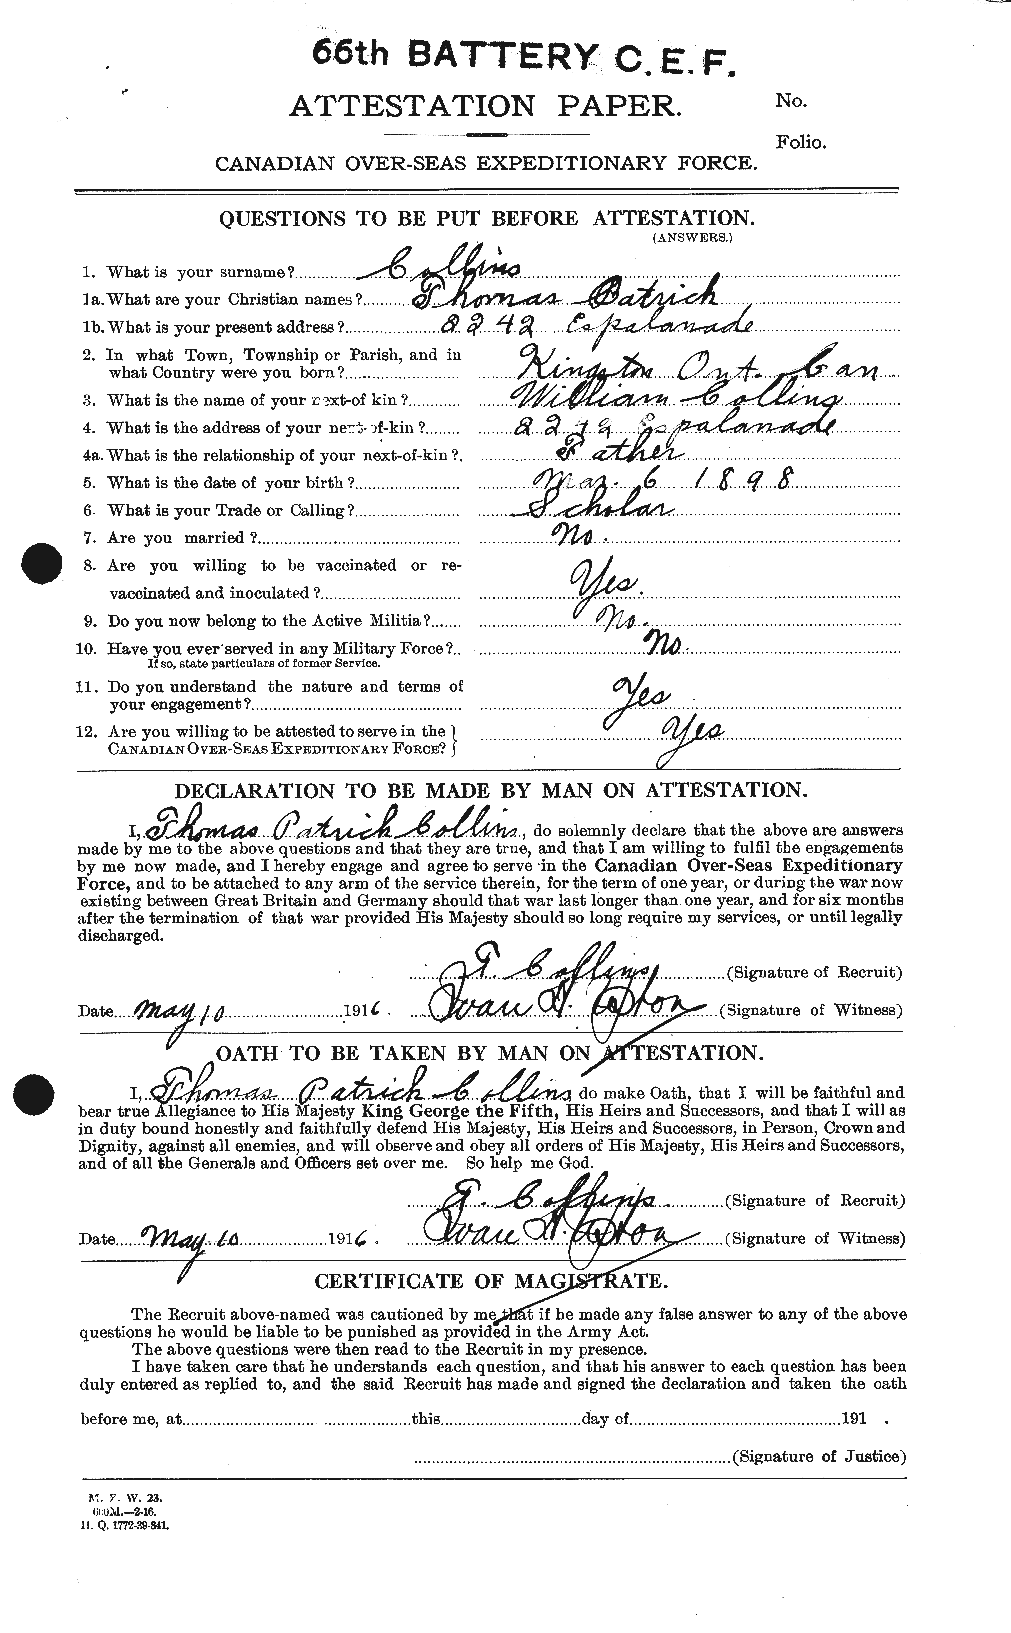 Personnel Records of the First World War - CEF 069122a